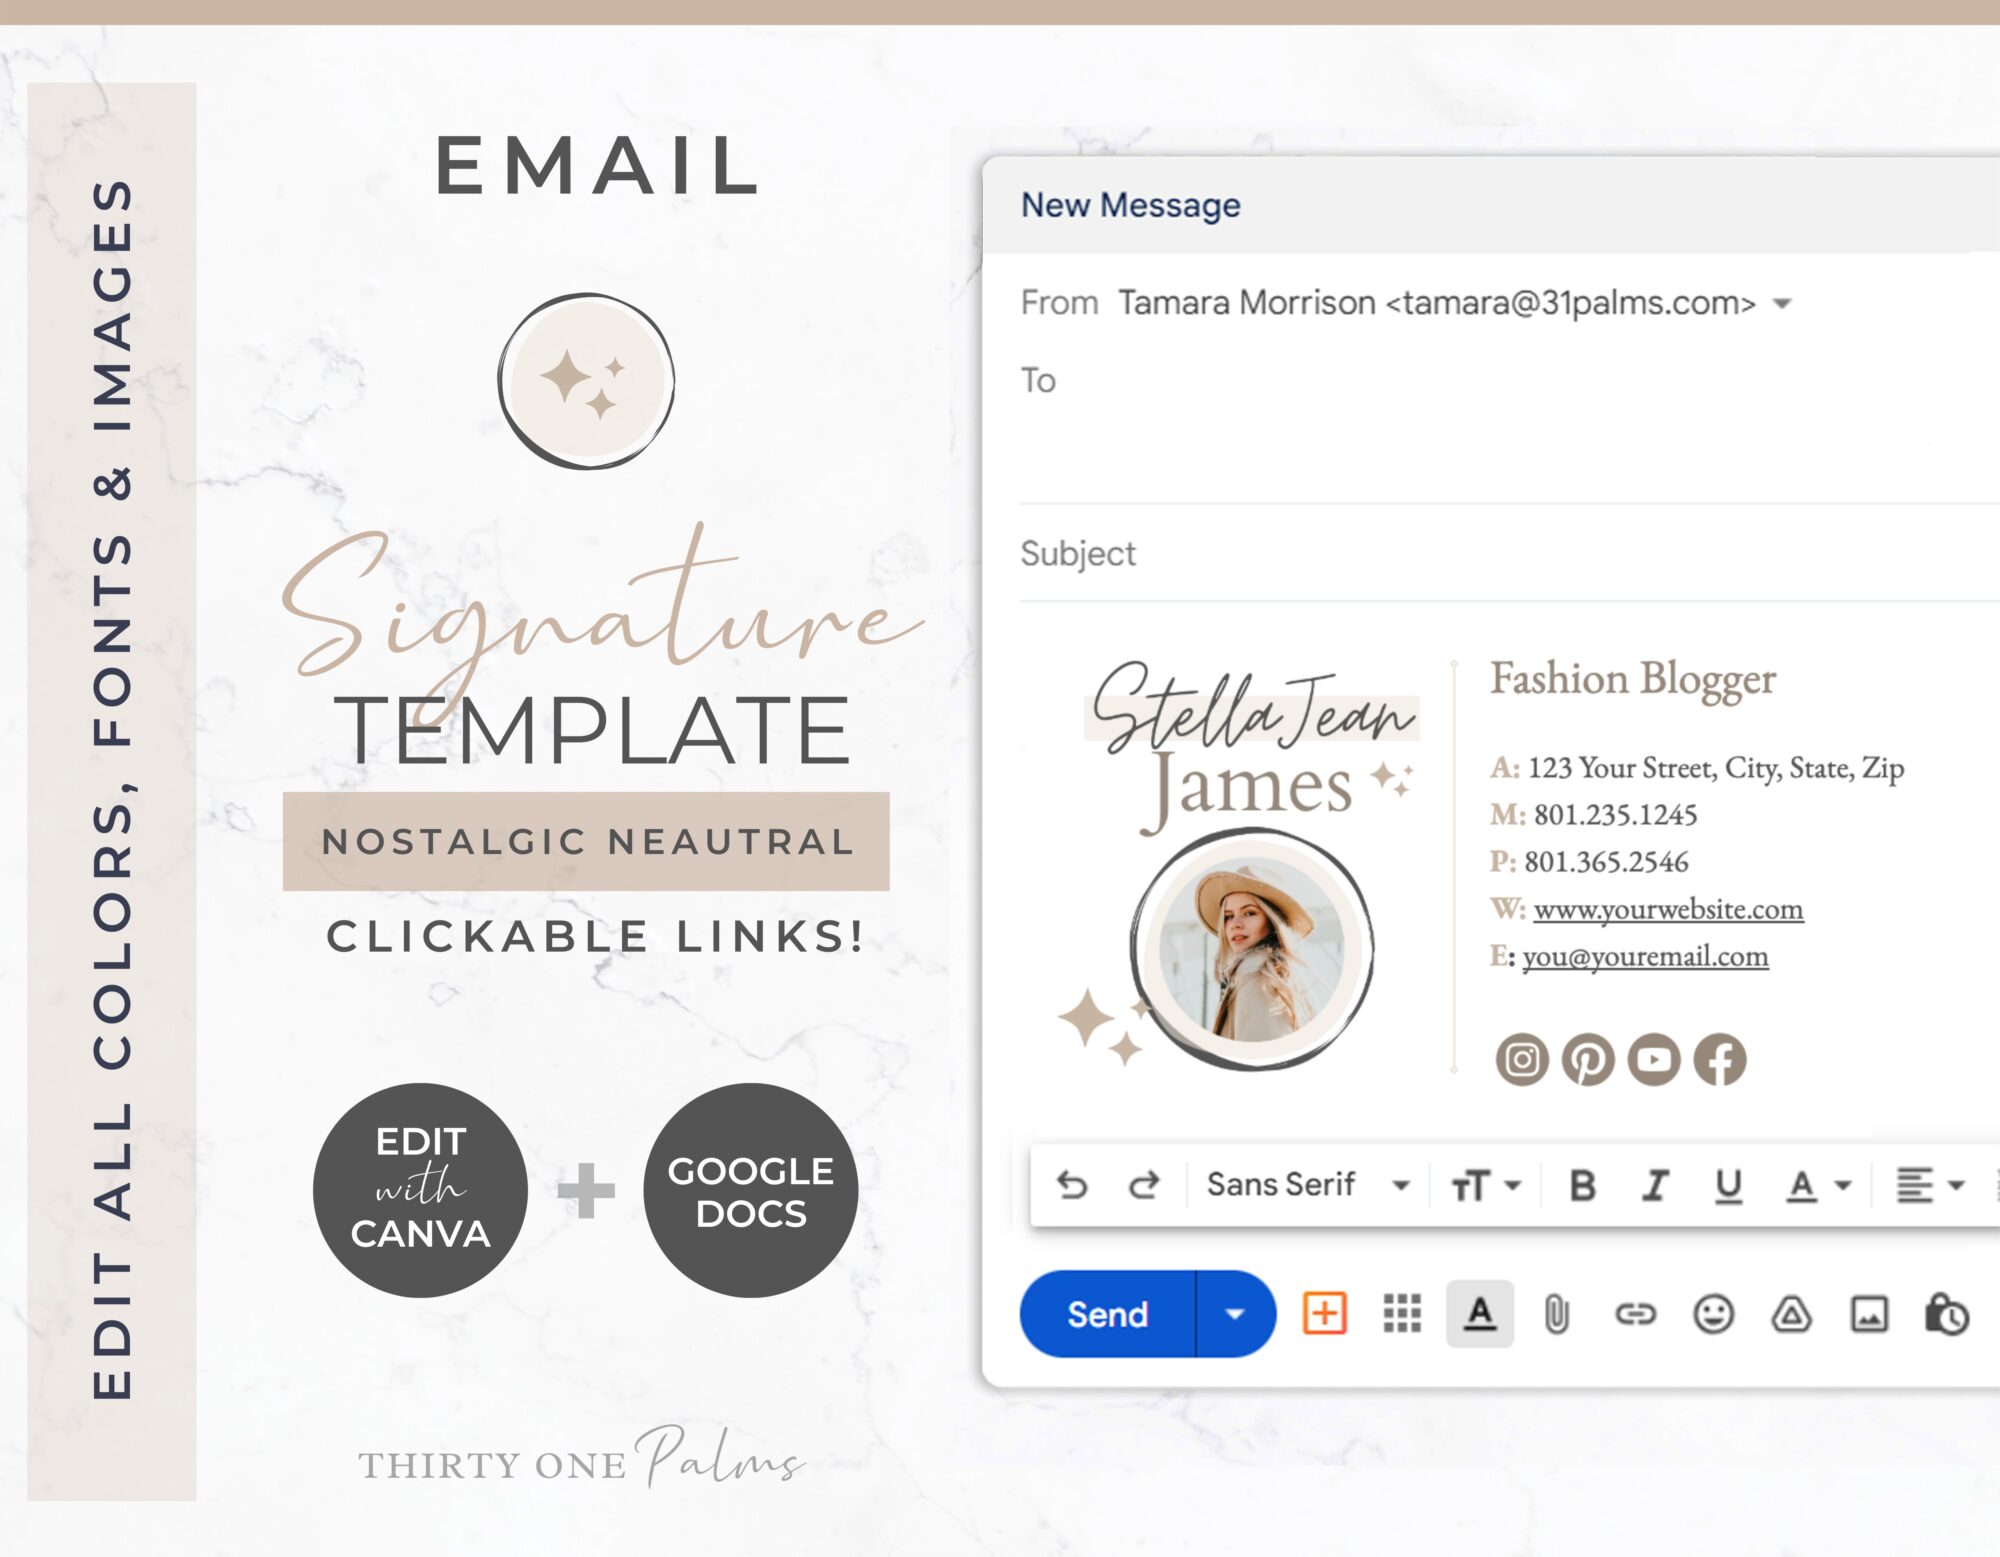 Gmail Email Signature Template for Canva – Nostalgic Neutral